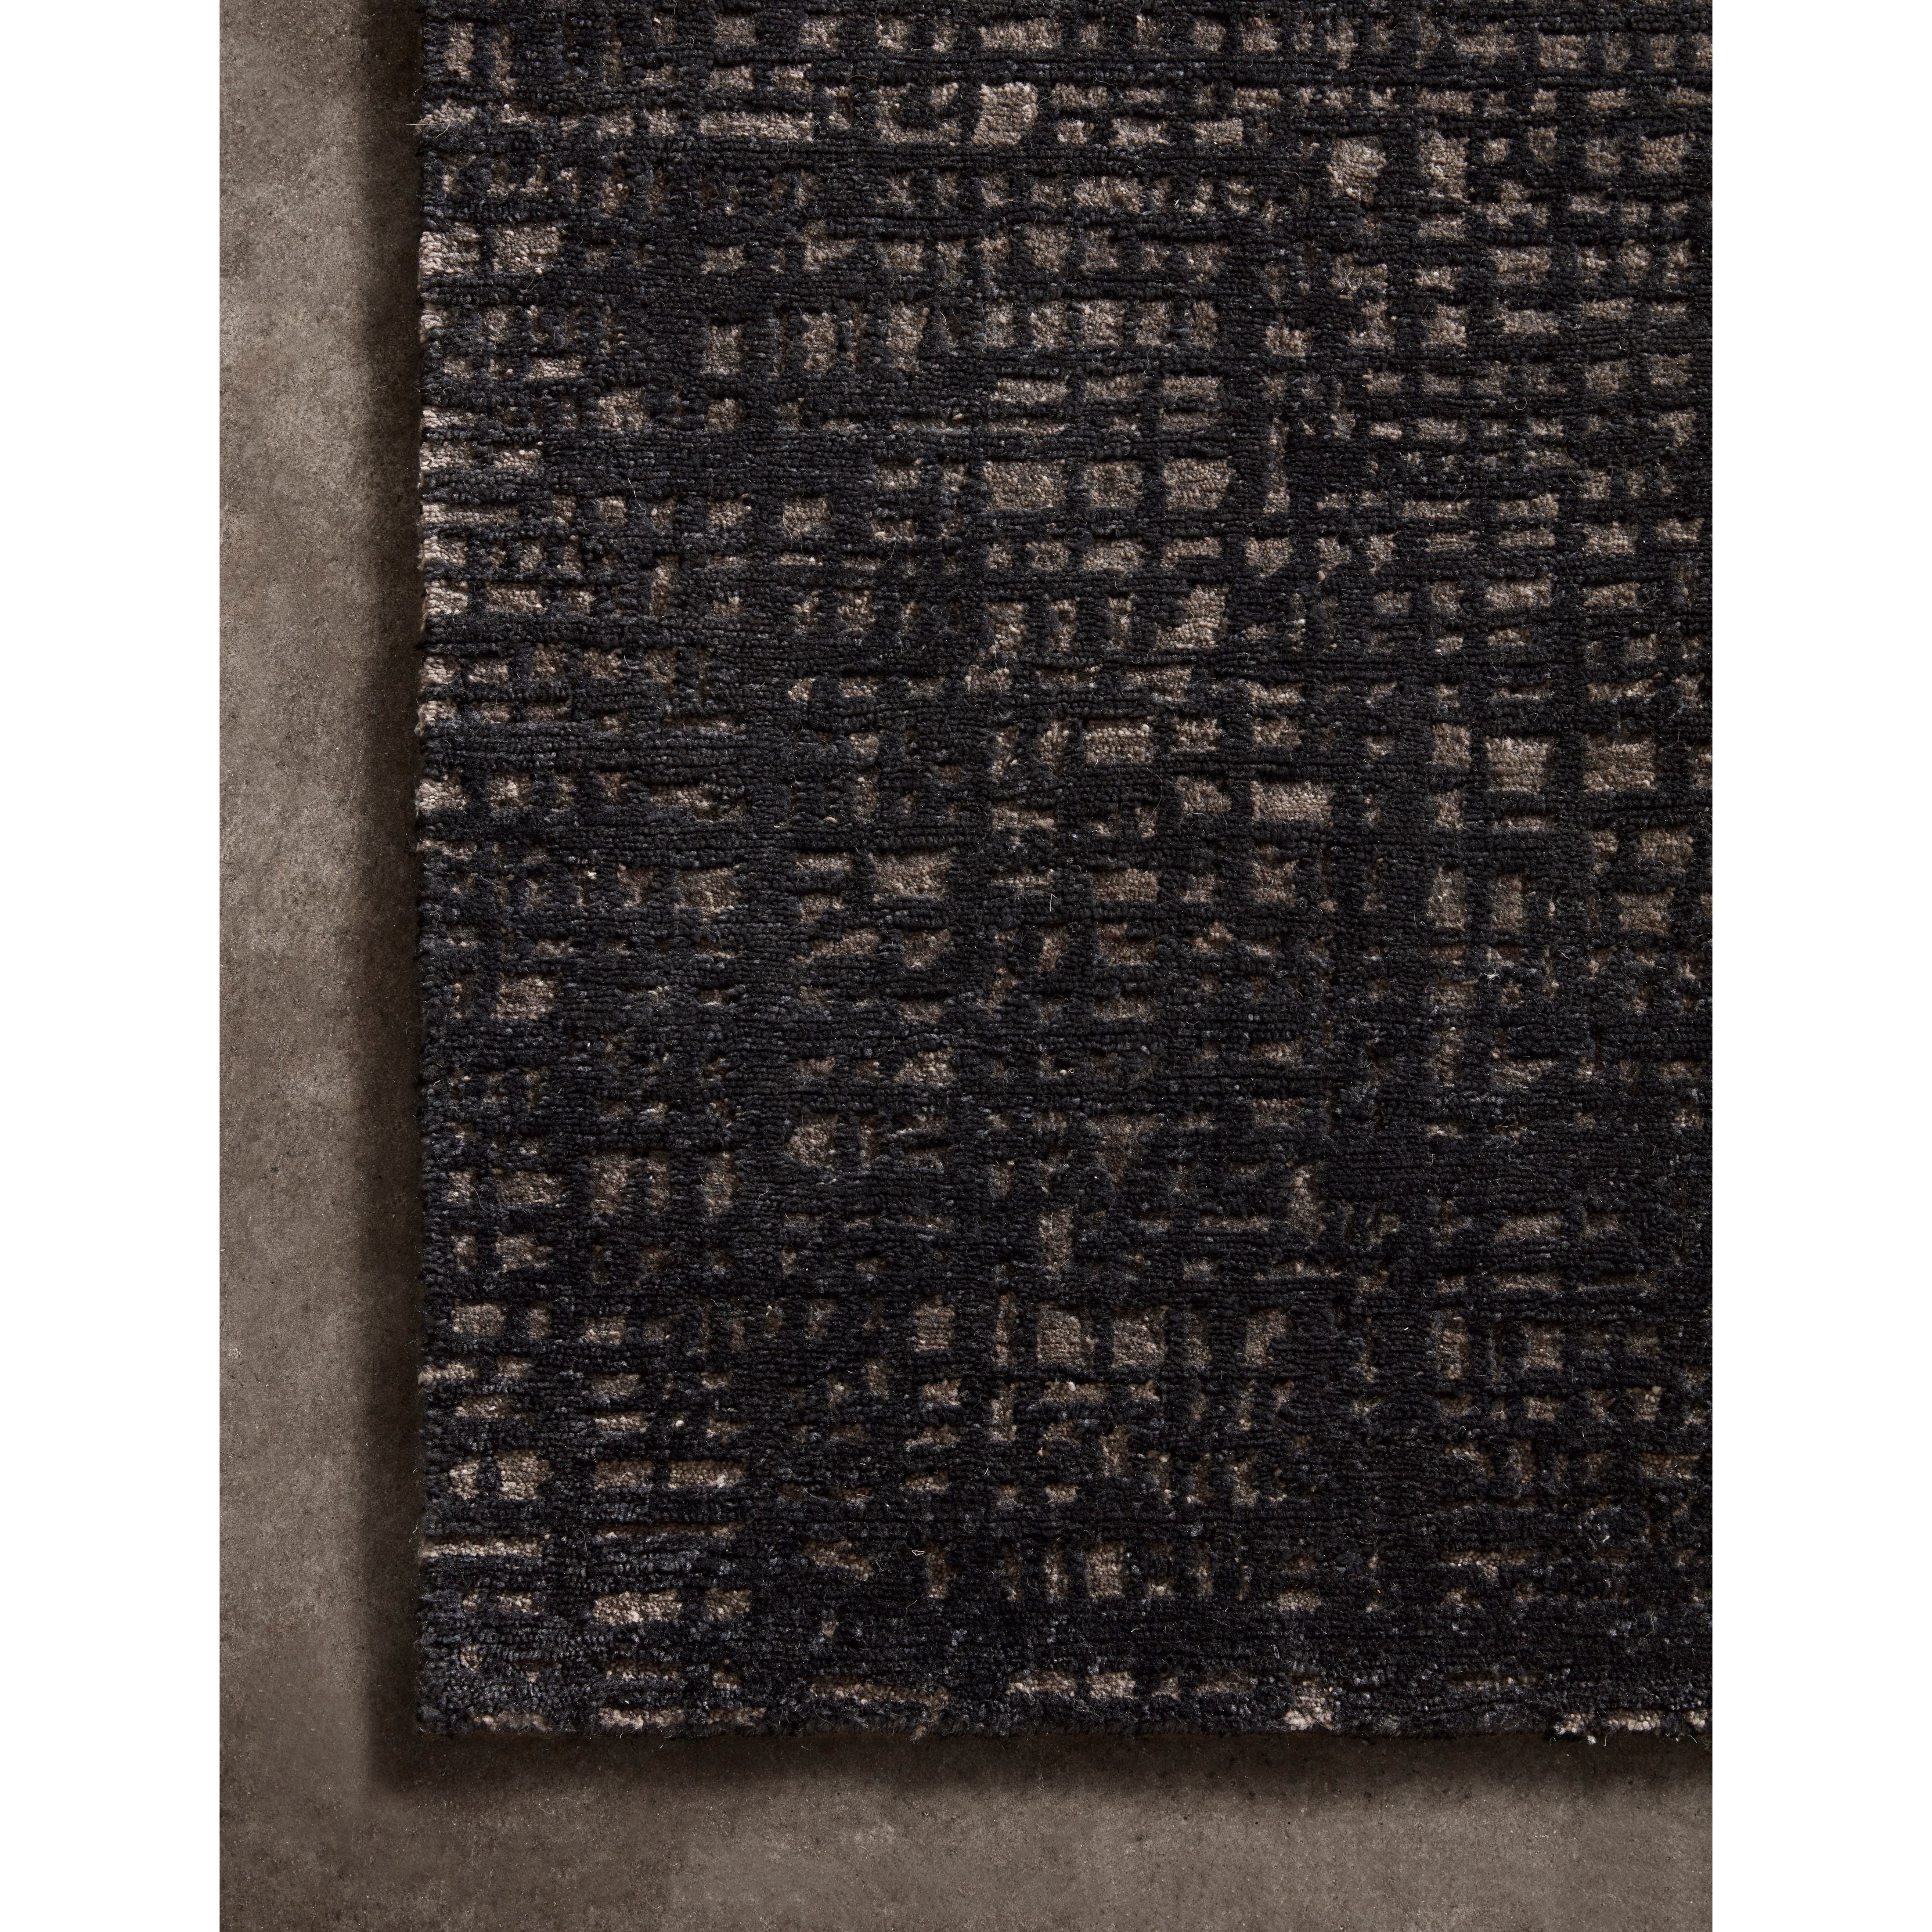 The Atlas Black / Bark Area Rug by Loloi, or ATL-05, showcases striking contemporary patterns with a sophisticated color palette. Bold yet approachable, Atlas' muted linear designs create a sense of refined movement. Hand Knotted. Wool | Nylon